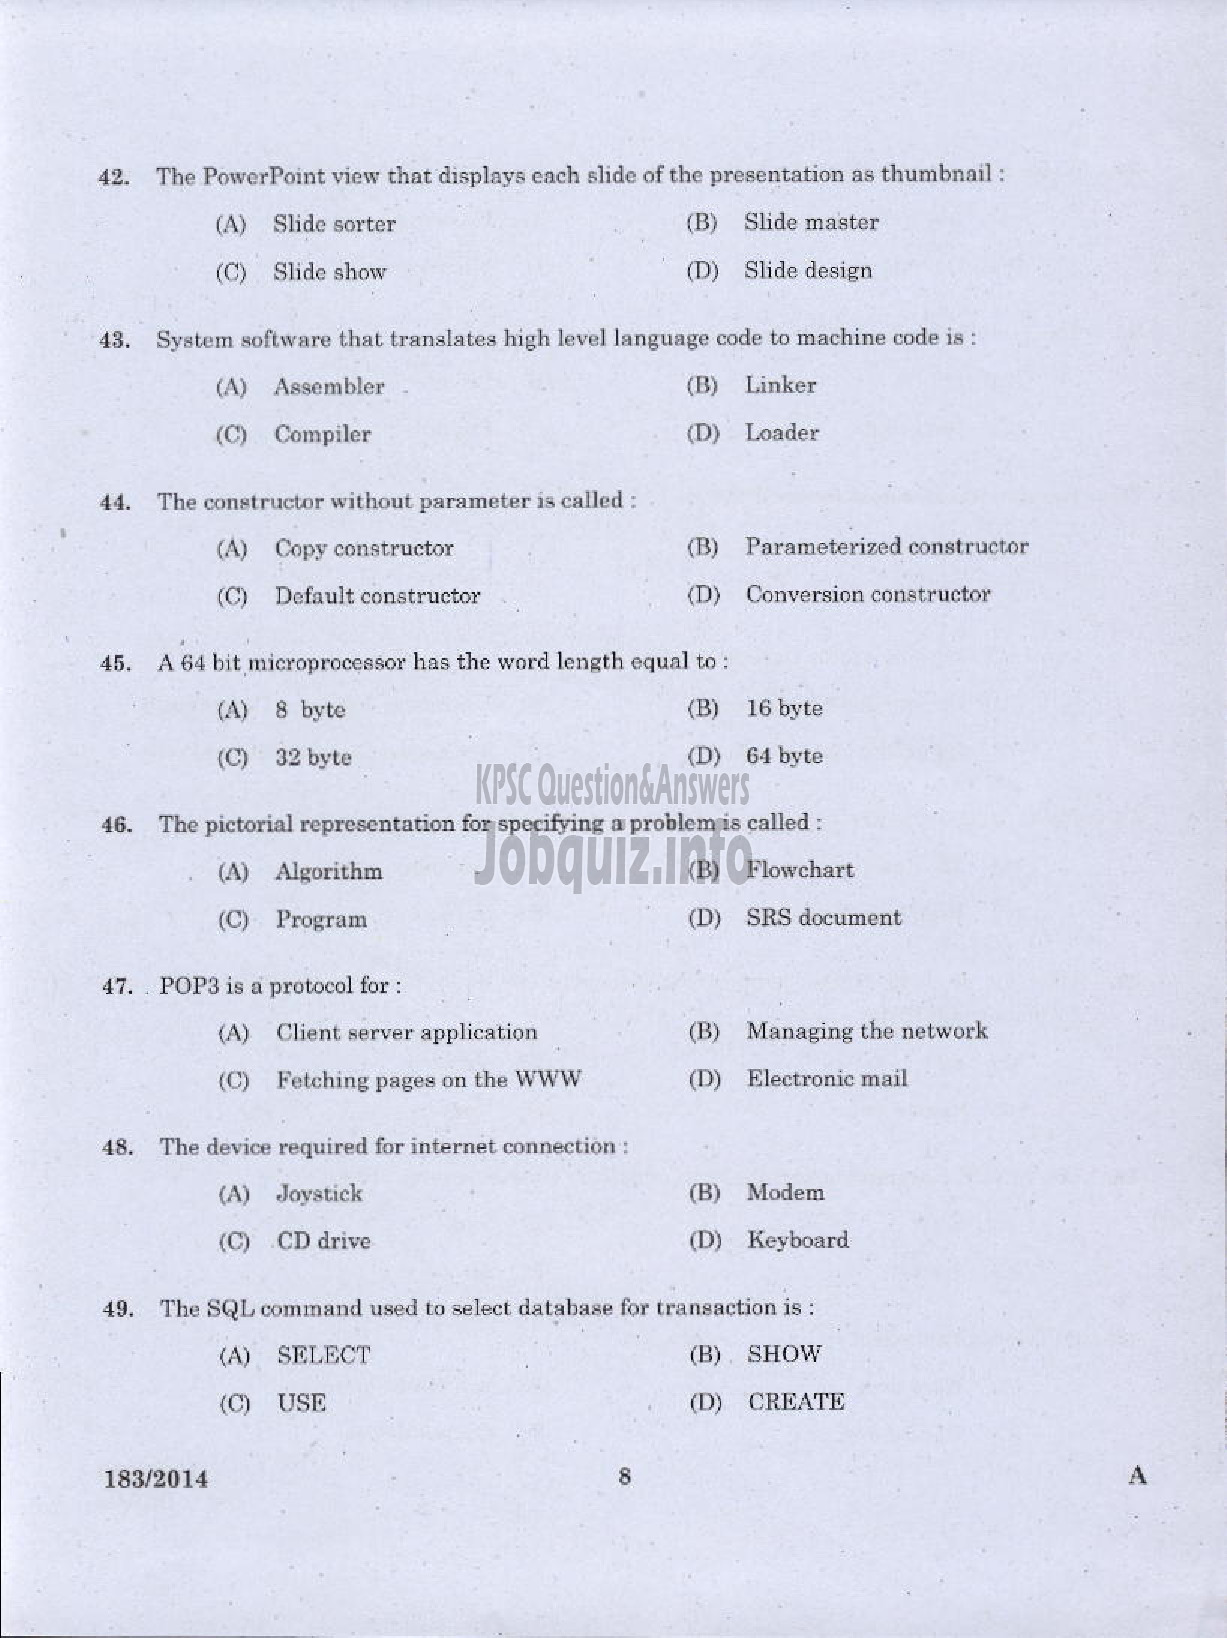 Kerala PSC Question Paper - TRADESMAN COMPUTER ENGINEERING TECHNICAL EDUCATION TVM KGD-6